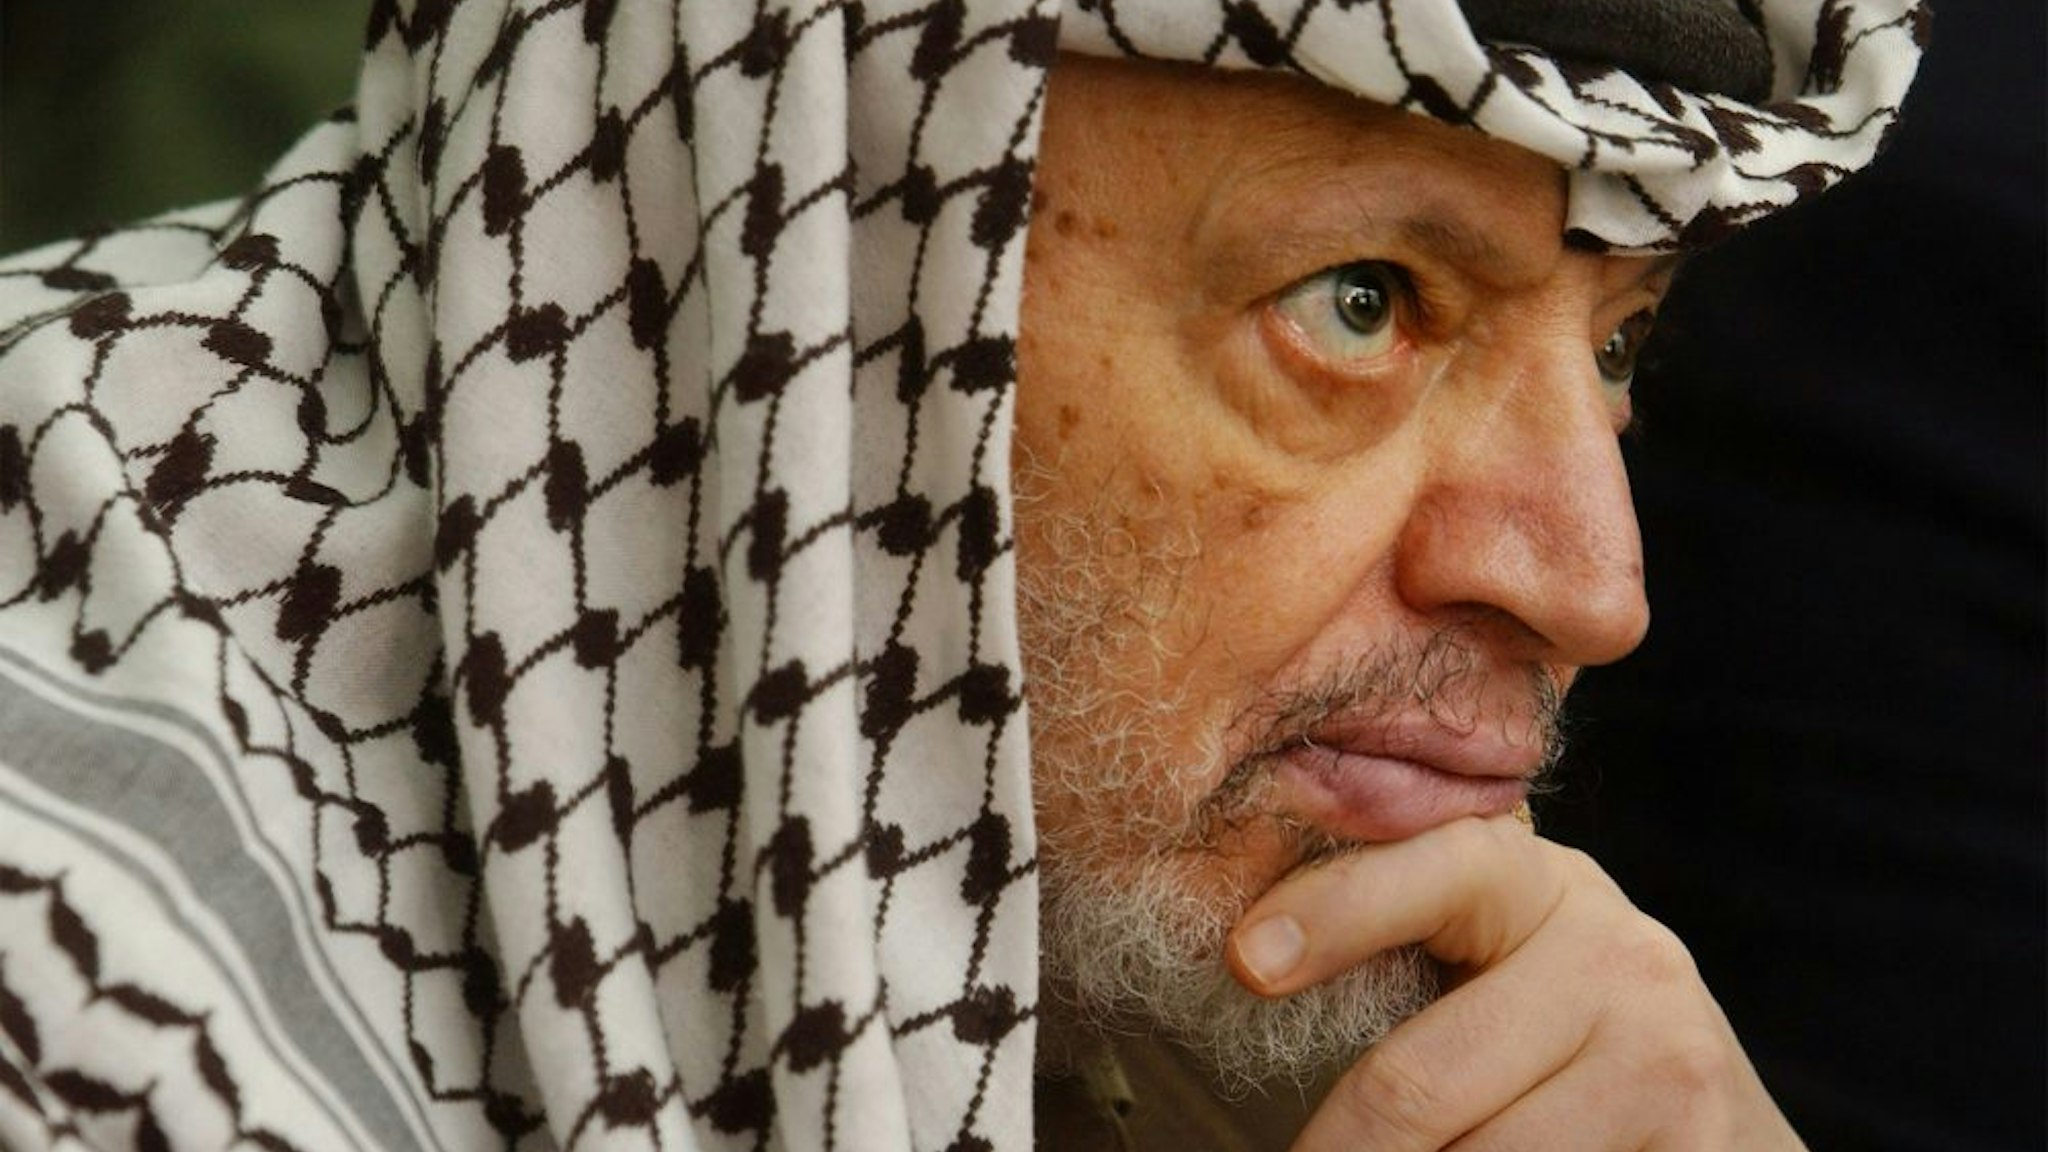 405490 02: Palestinian leader Yasser Arafat attends Friday prayers May 17, 2002 at his headquarters in the West Bank town of Ramallah. Arafat said Friday there could not free Palestinian elections until the Israel military occupation ended in the West Bank and Gaza Strip.